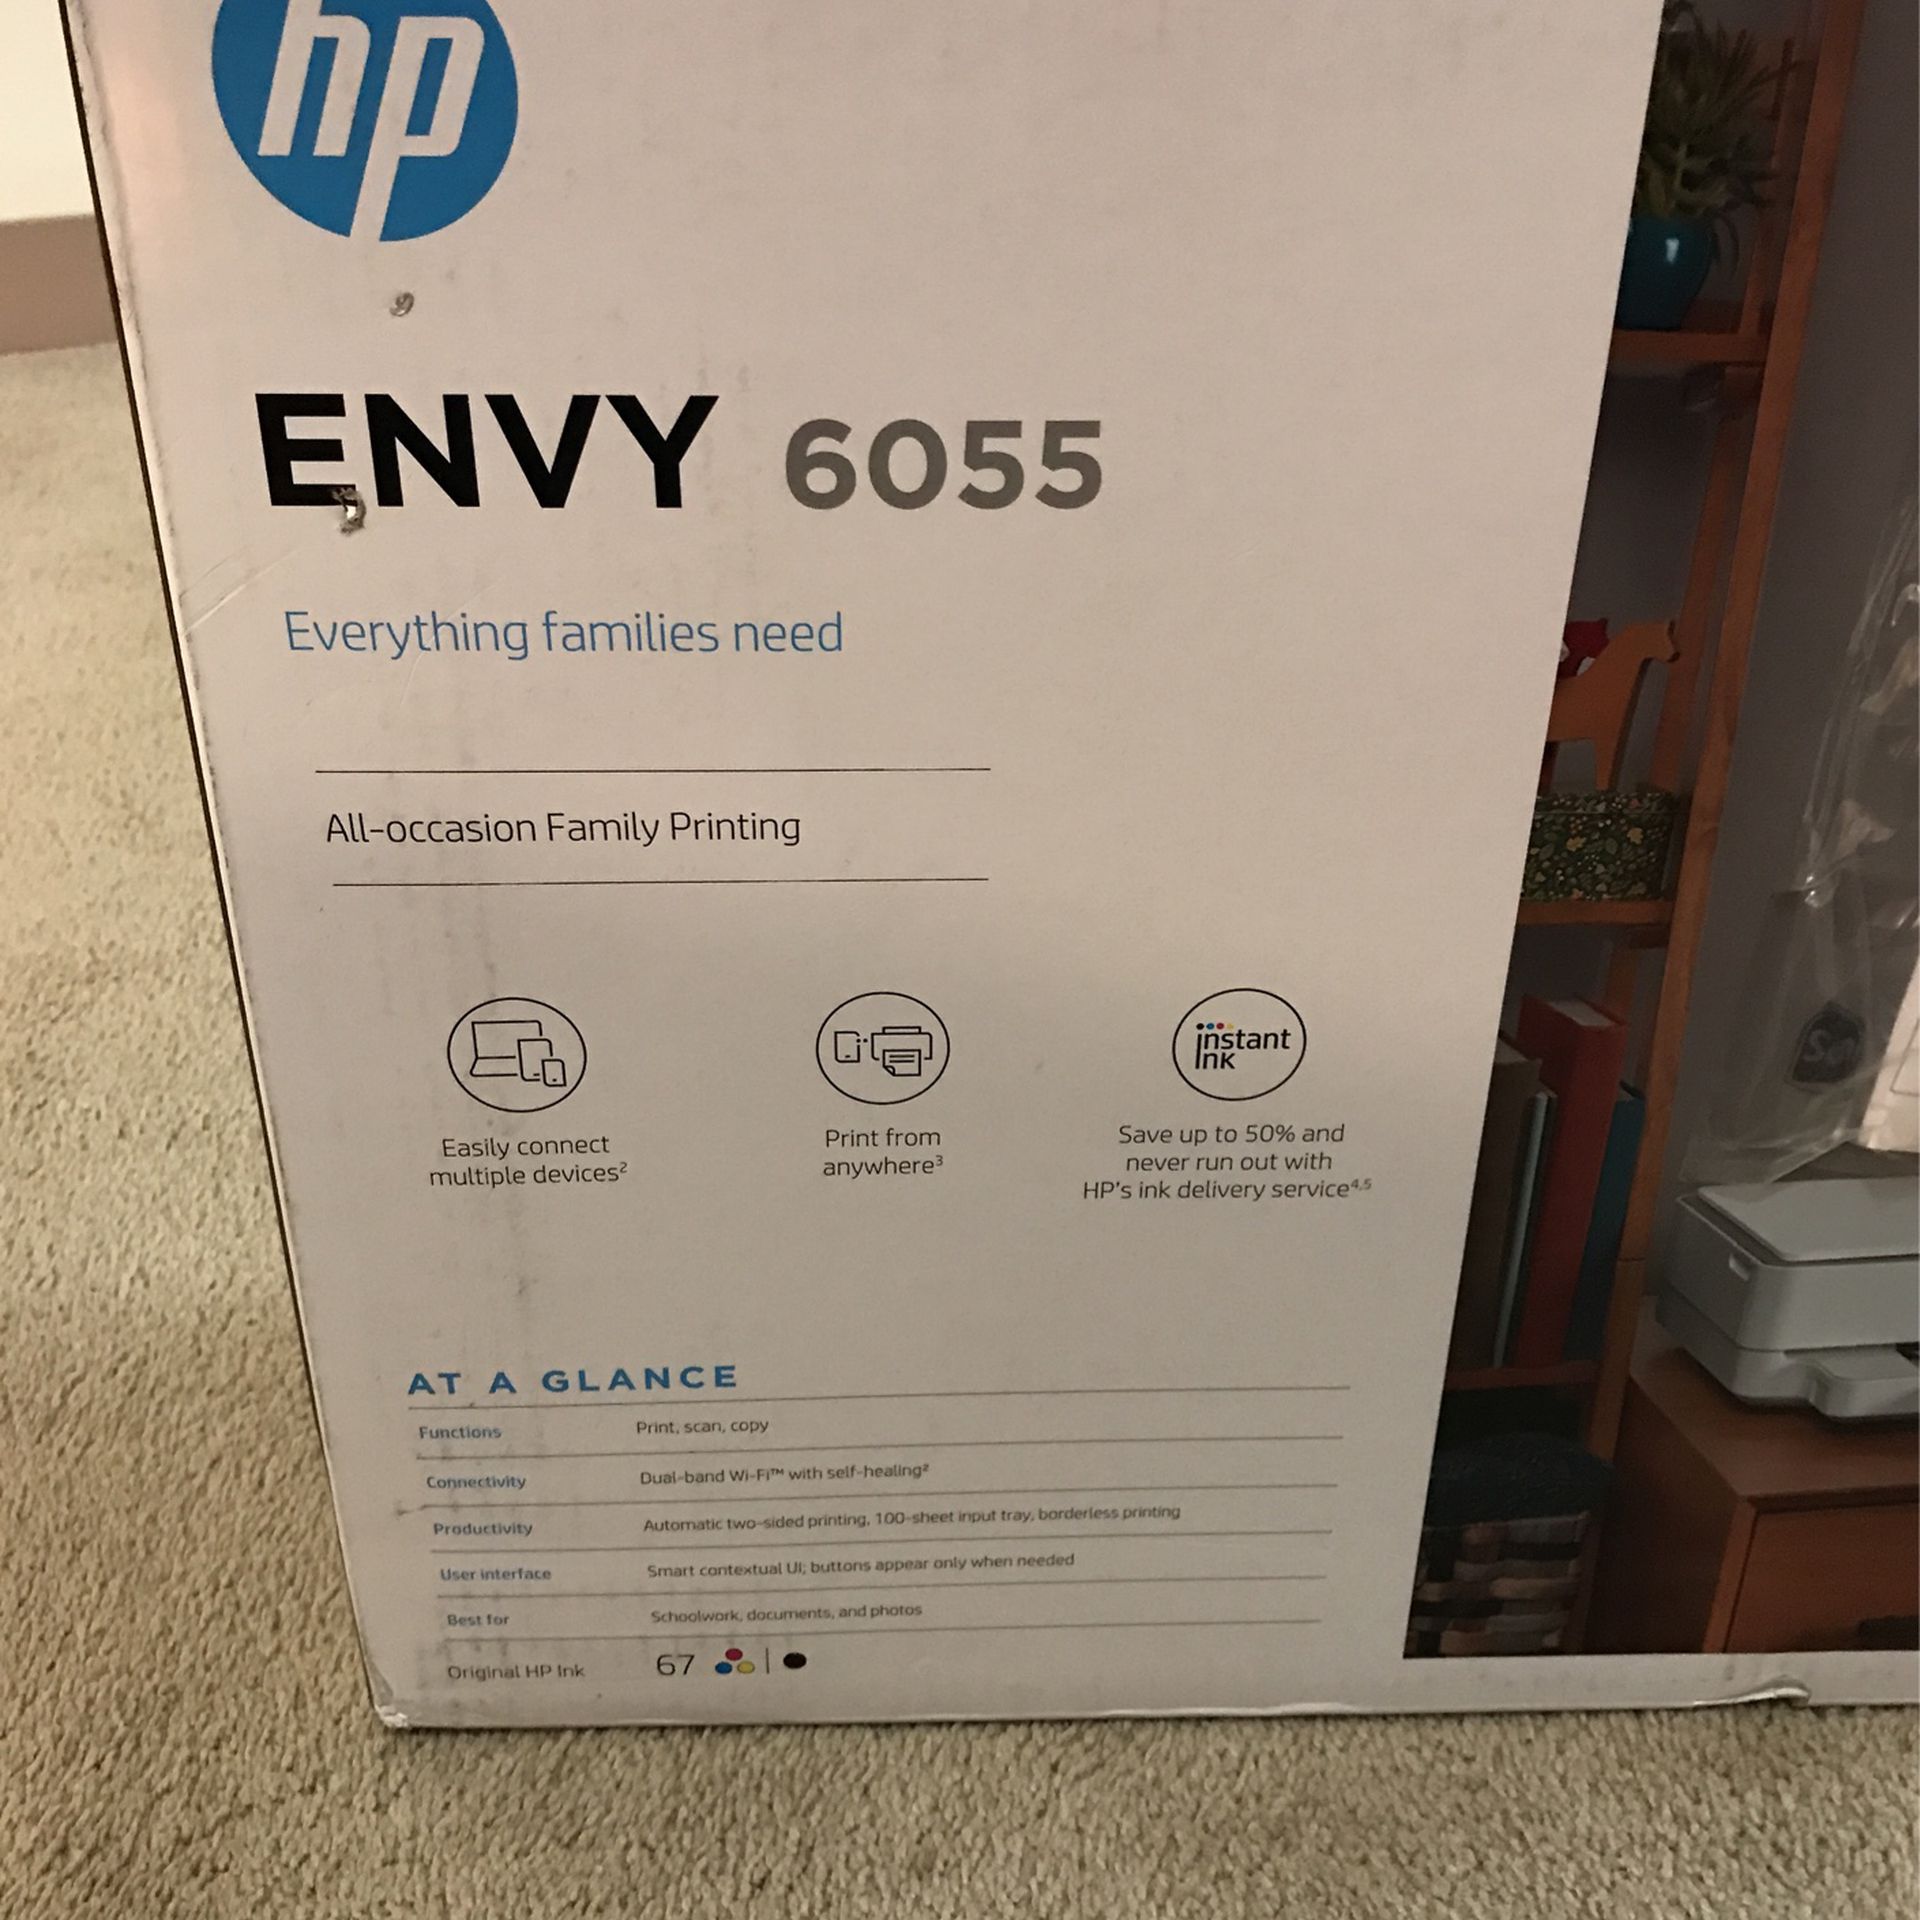 HP Envy 6055 All Occasion Family Printing